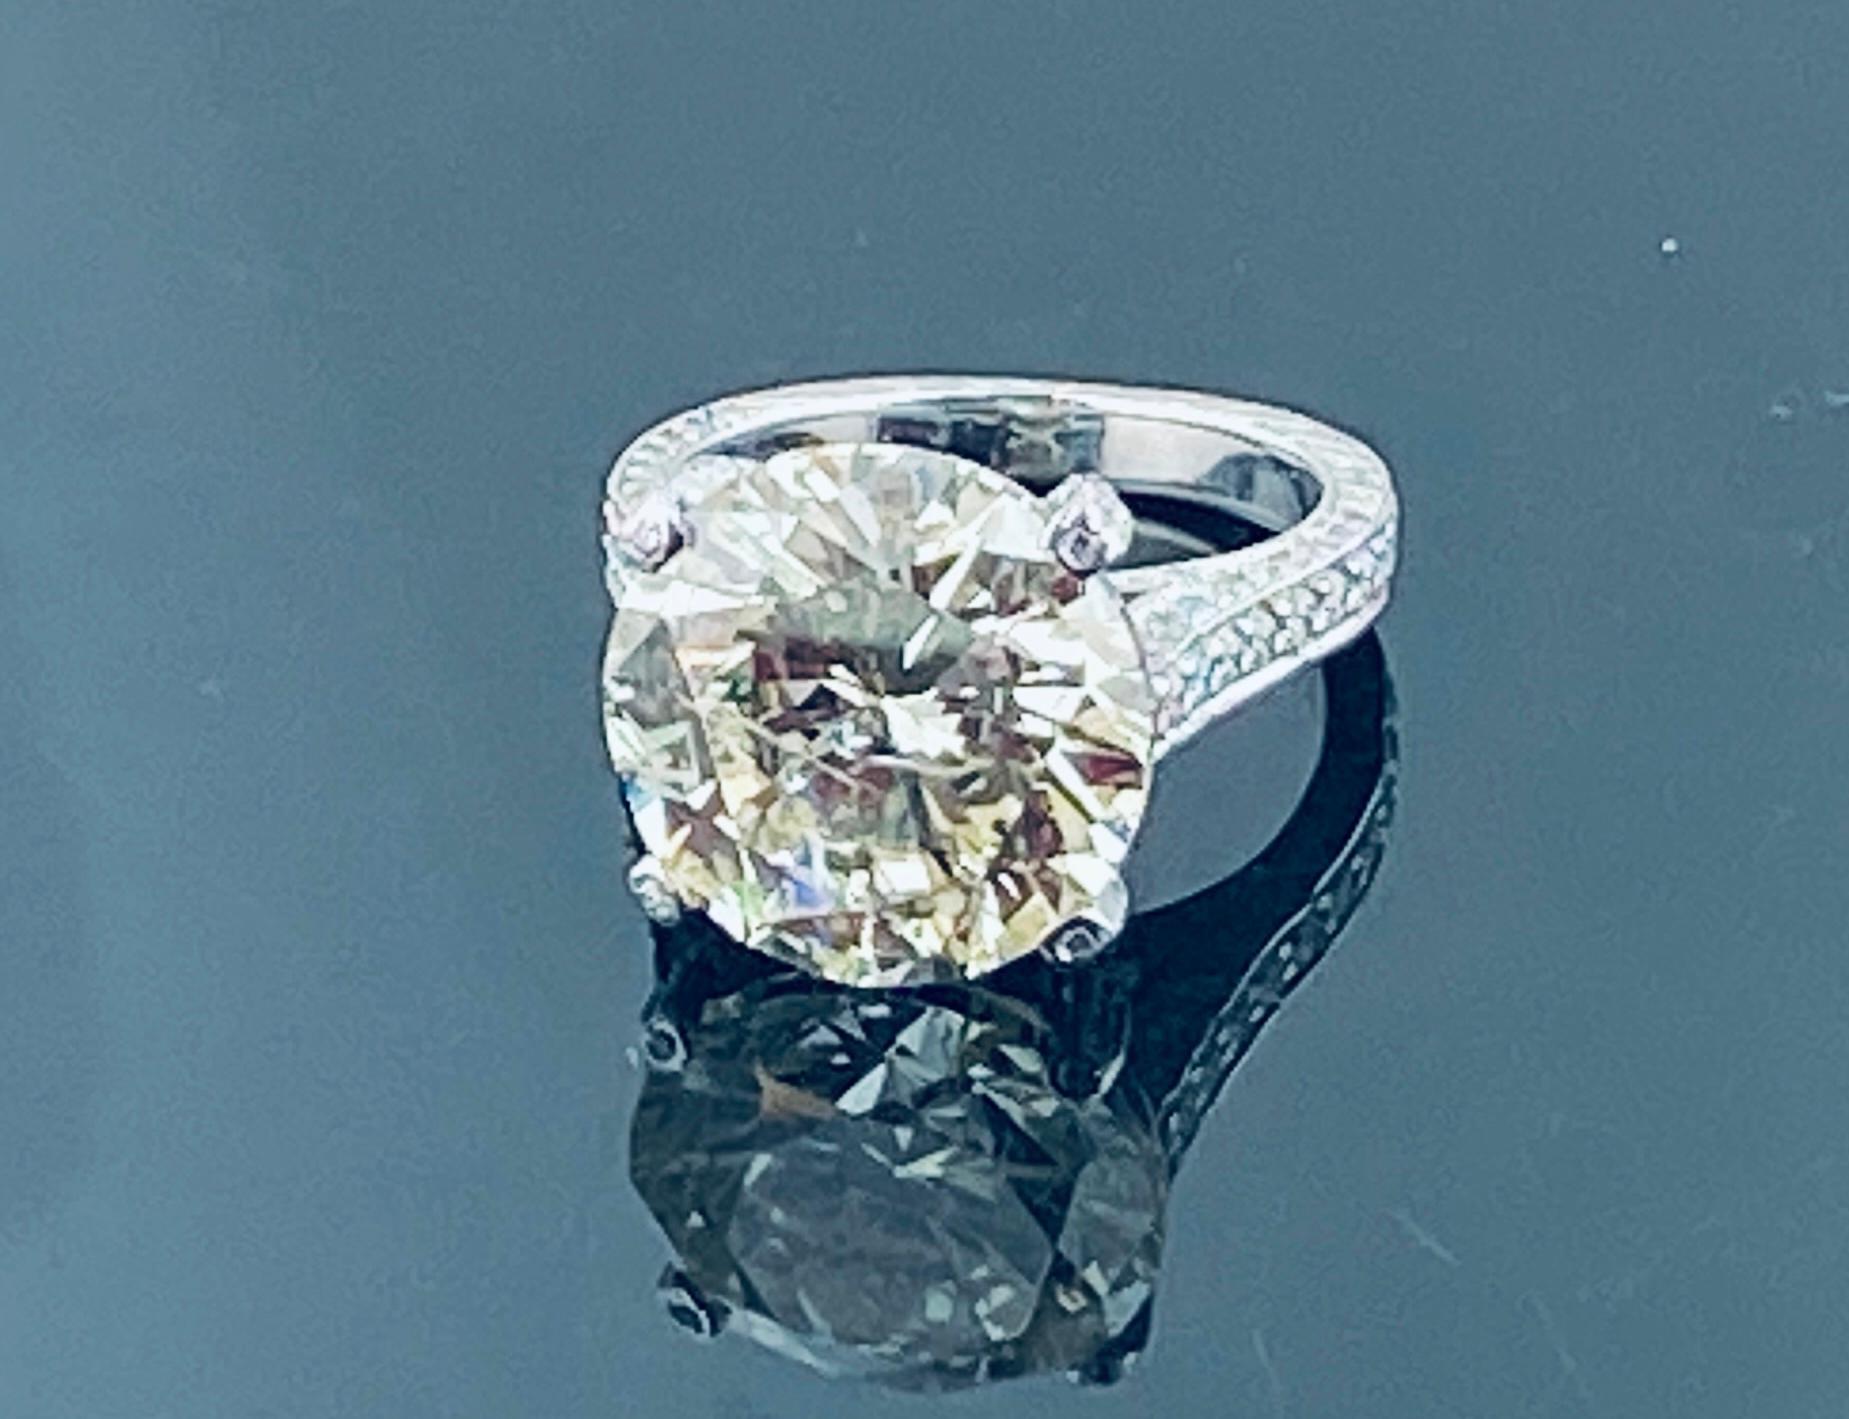 Set in Platinum, weighing 11 grams, is one 10.32 carat Round brilliant Cut diamond, Color range of: L-M, clarity grade of SI-3.  the mounting is set with 154 Round Brilliant Cut diamonds for a total weight of 1.38 carats, Color Range of: F-G,